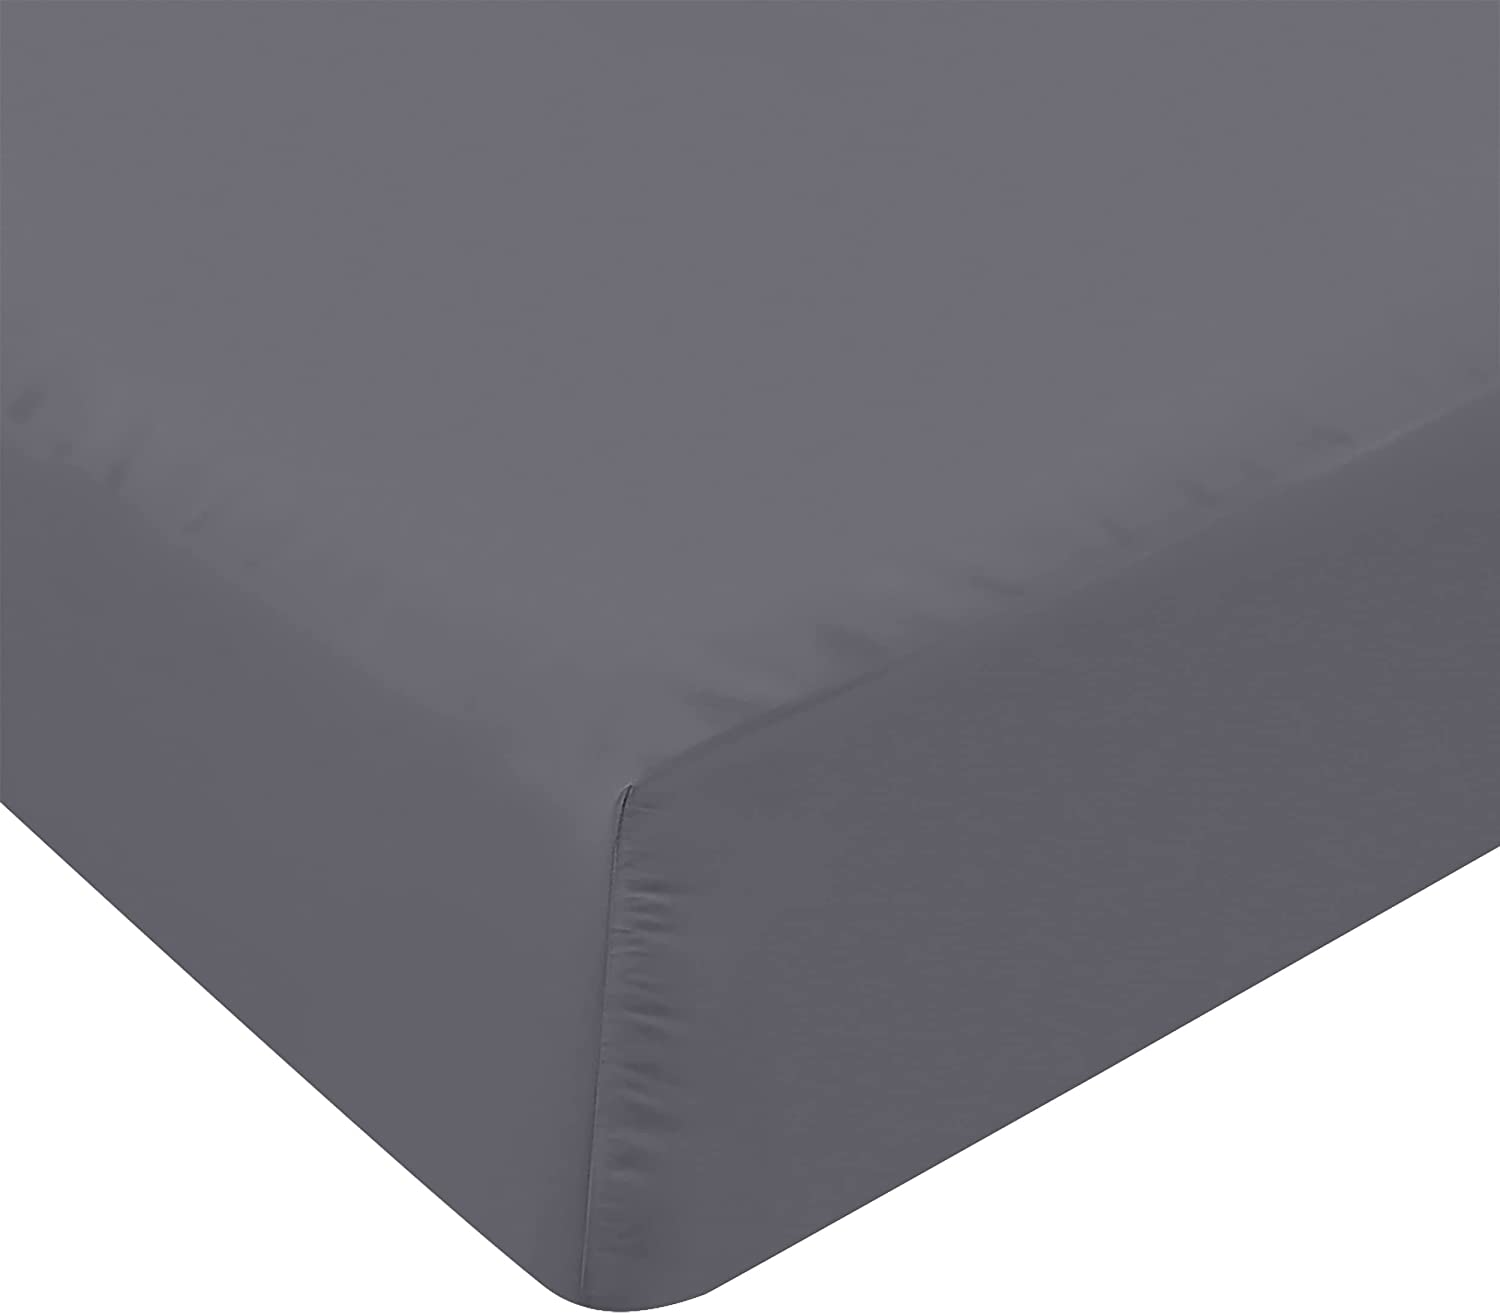 35 cm 90 x 200 cm, Black Shrinkage and Fade Resistant Utopia Bedding Fitted Sheet - Easy Care Soft Brushed Microfibre Fabric Deep Pocket 14 inch